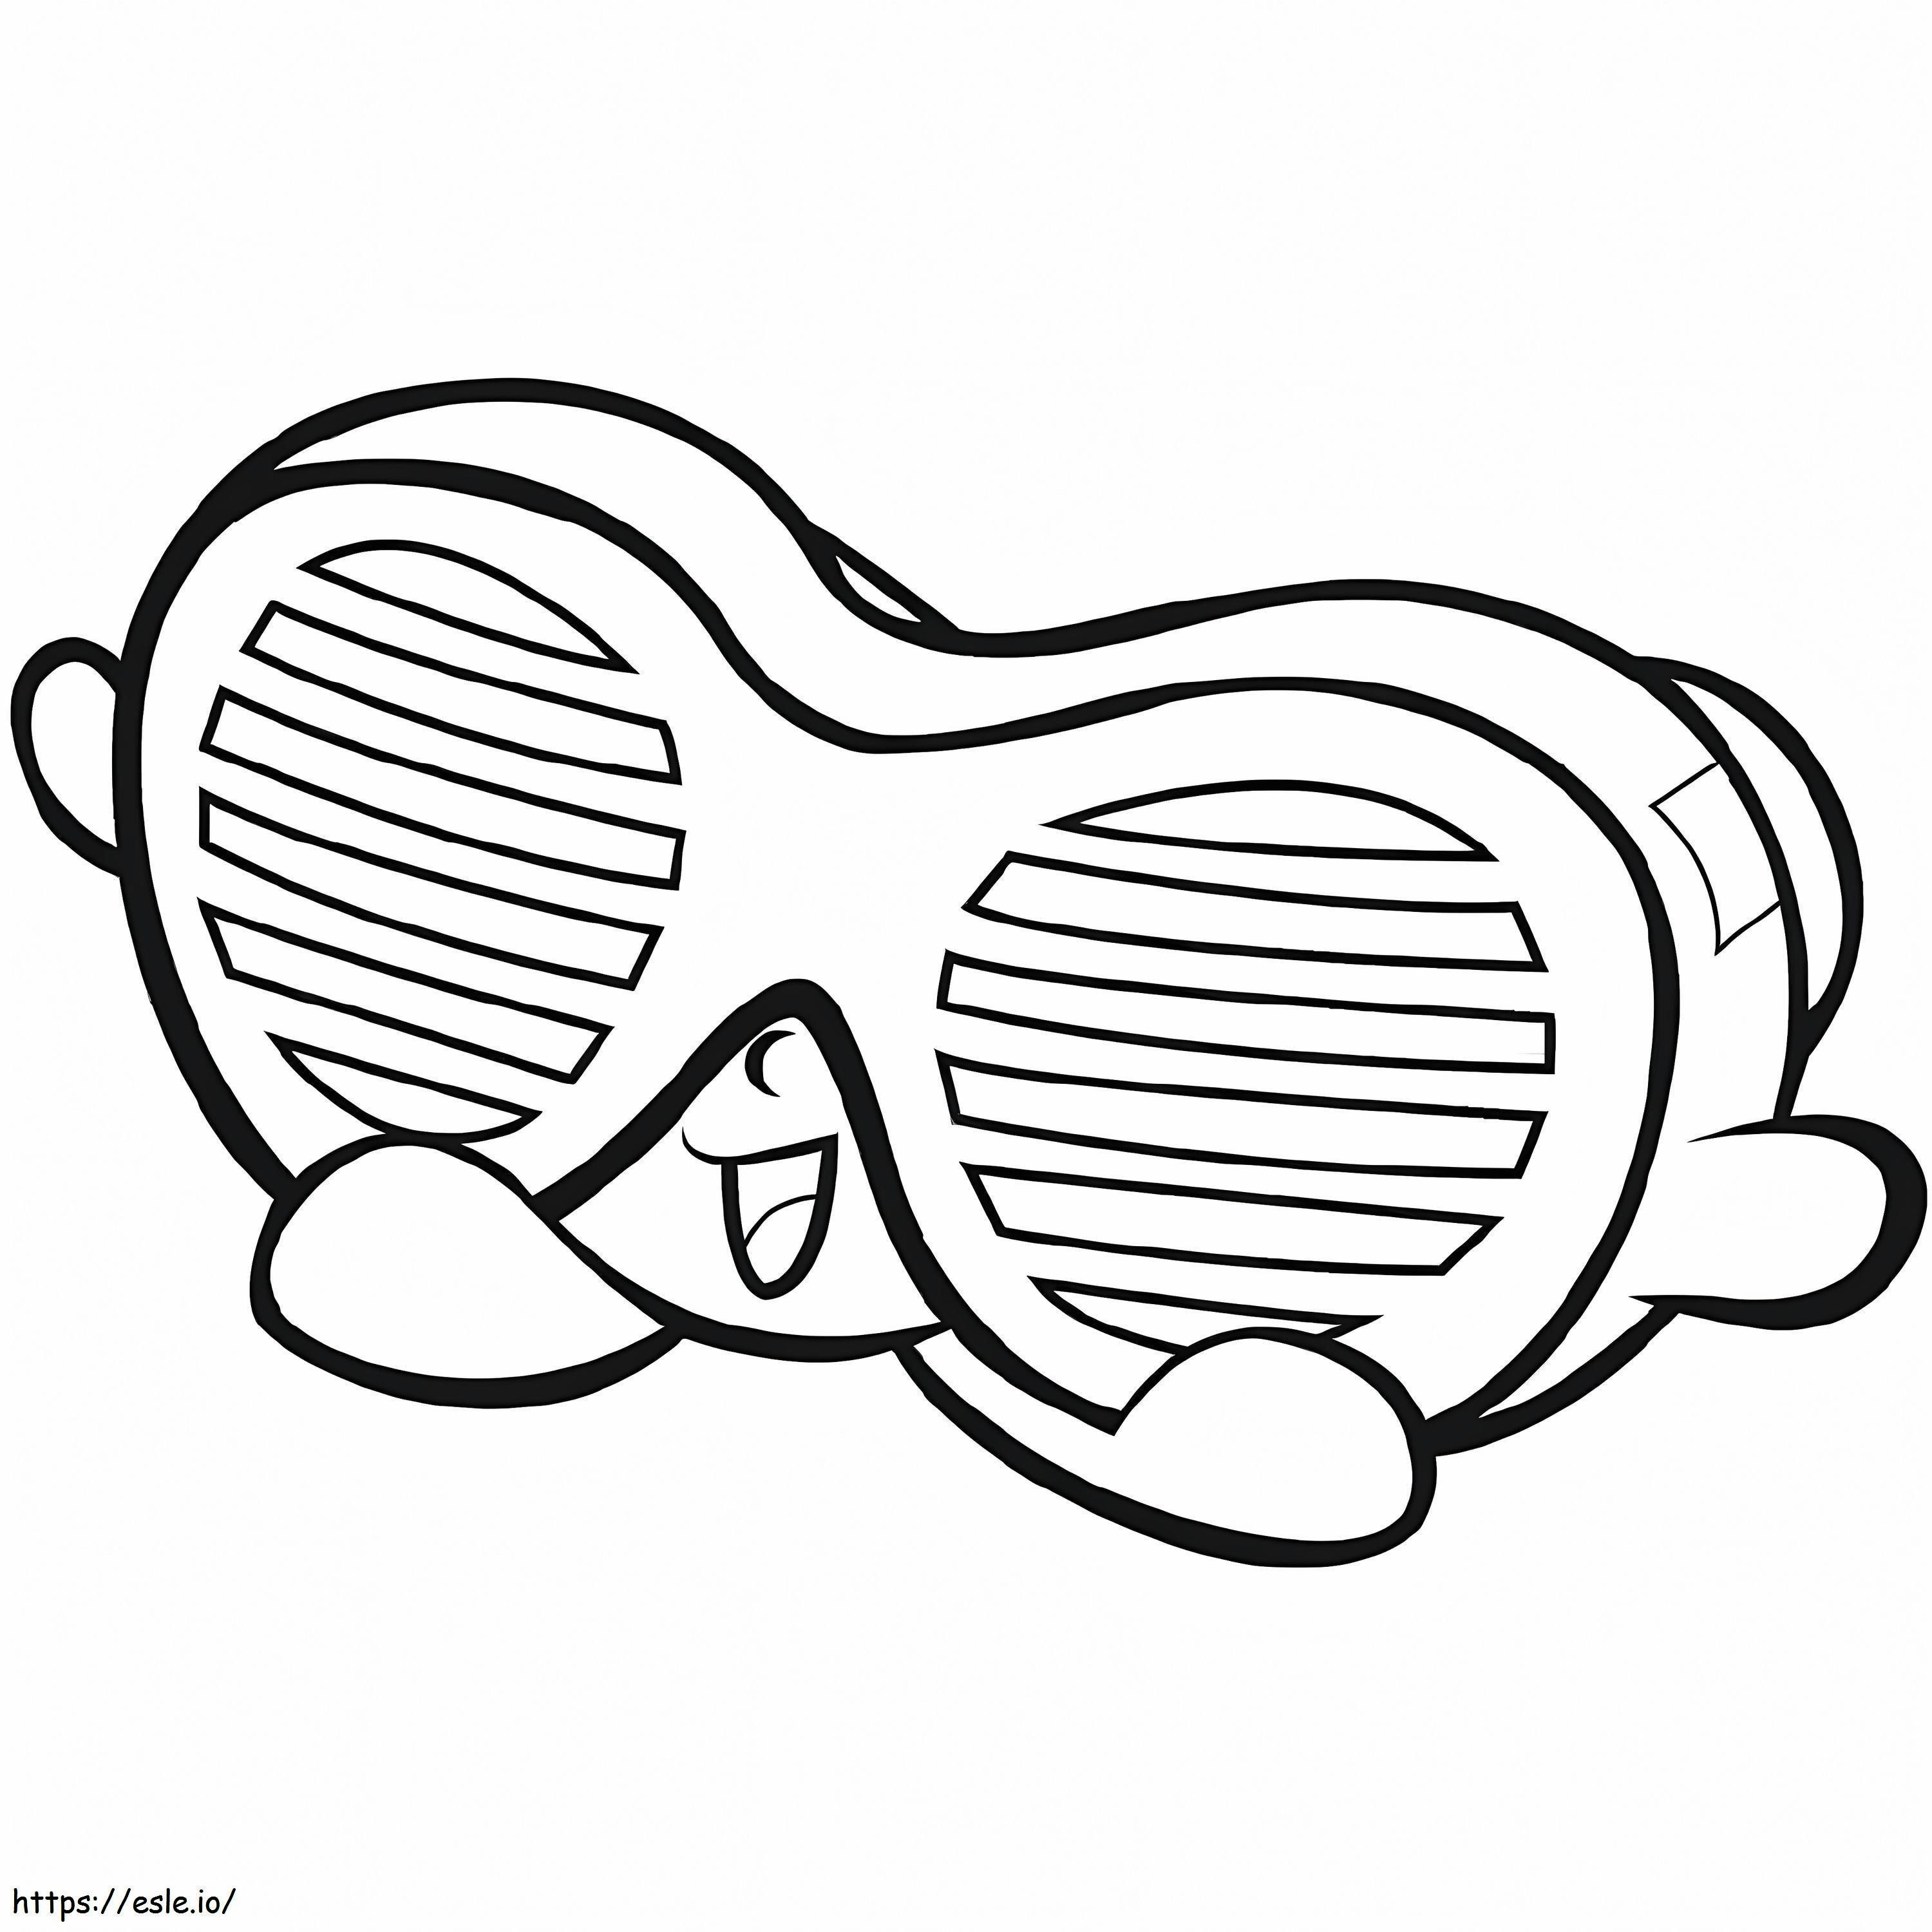 Gafas Groovy Shopkin coloring page